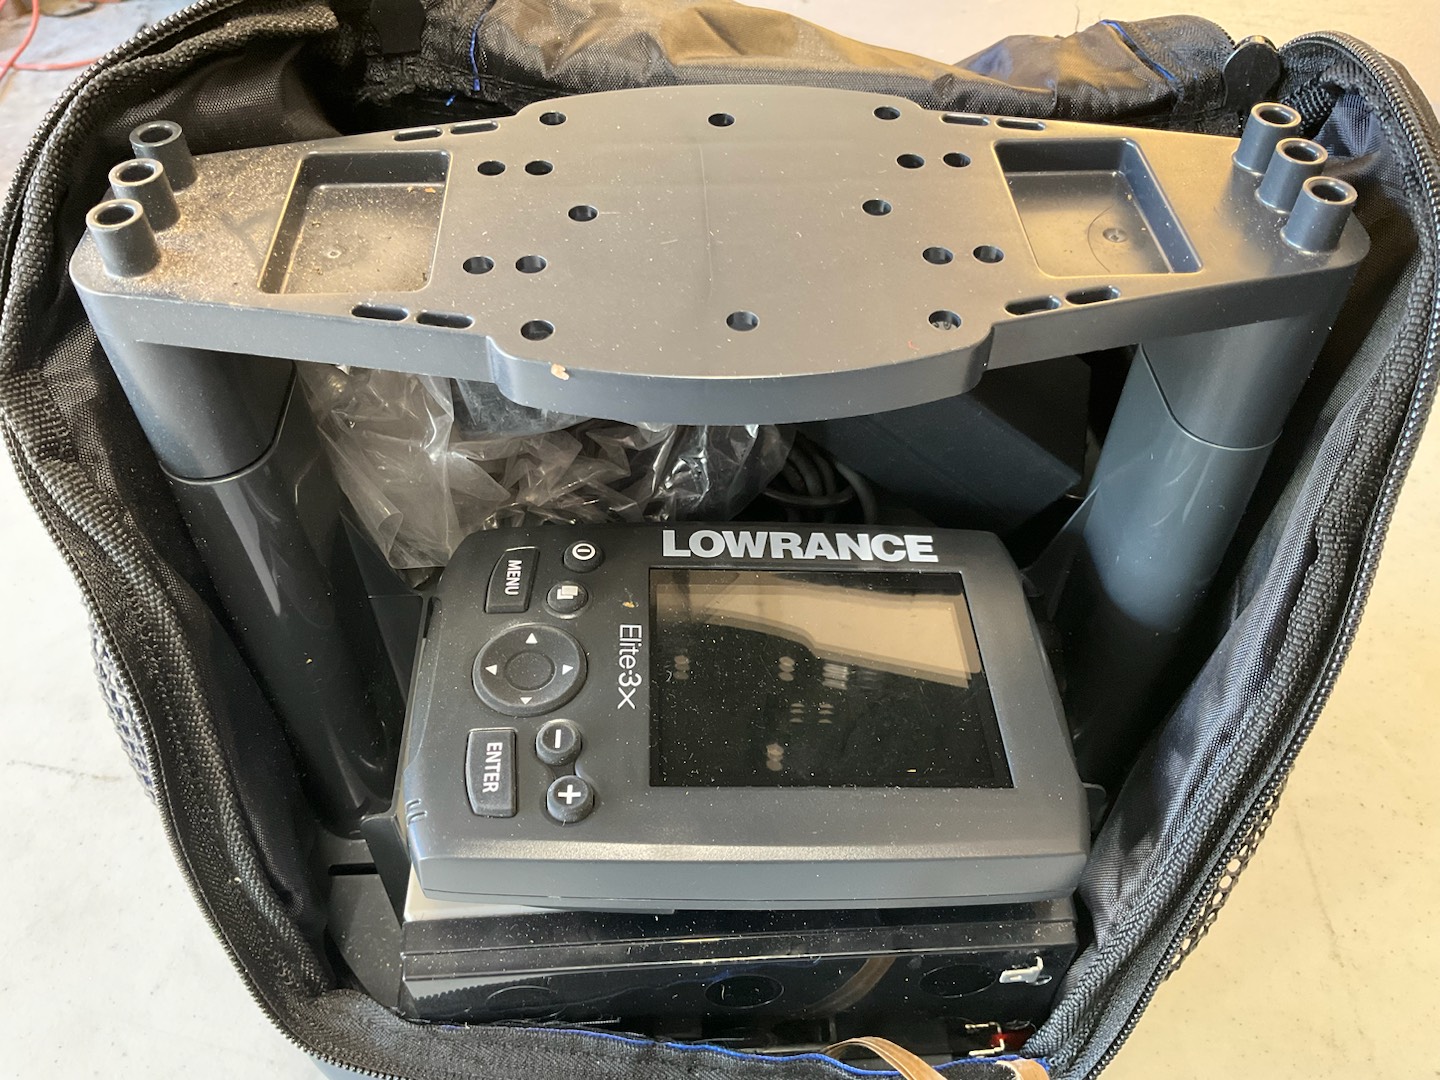 Lowrance Elite 3x Fishfinder - Classifieds - Buy, Sell, Trade or Rent -  Lake Ontario United - Lake Ontario's Largest Fishing & Hunting Community -  New York and Ontario Canada